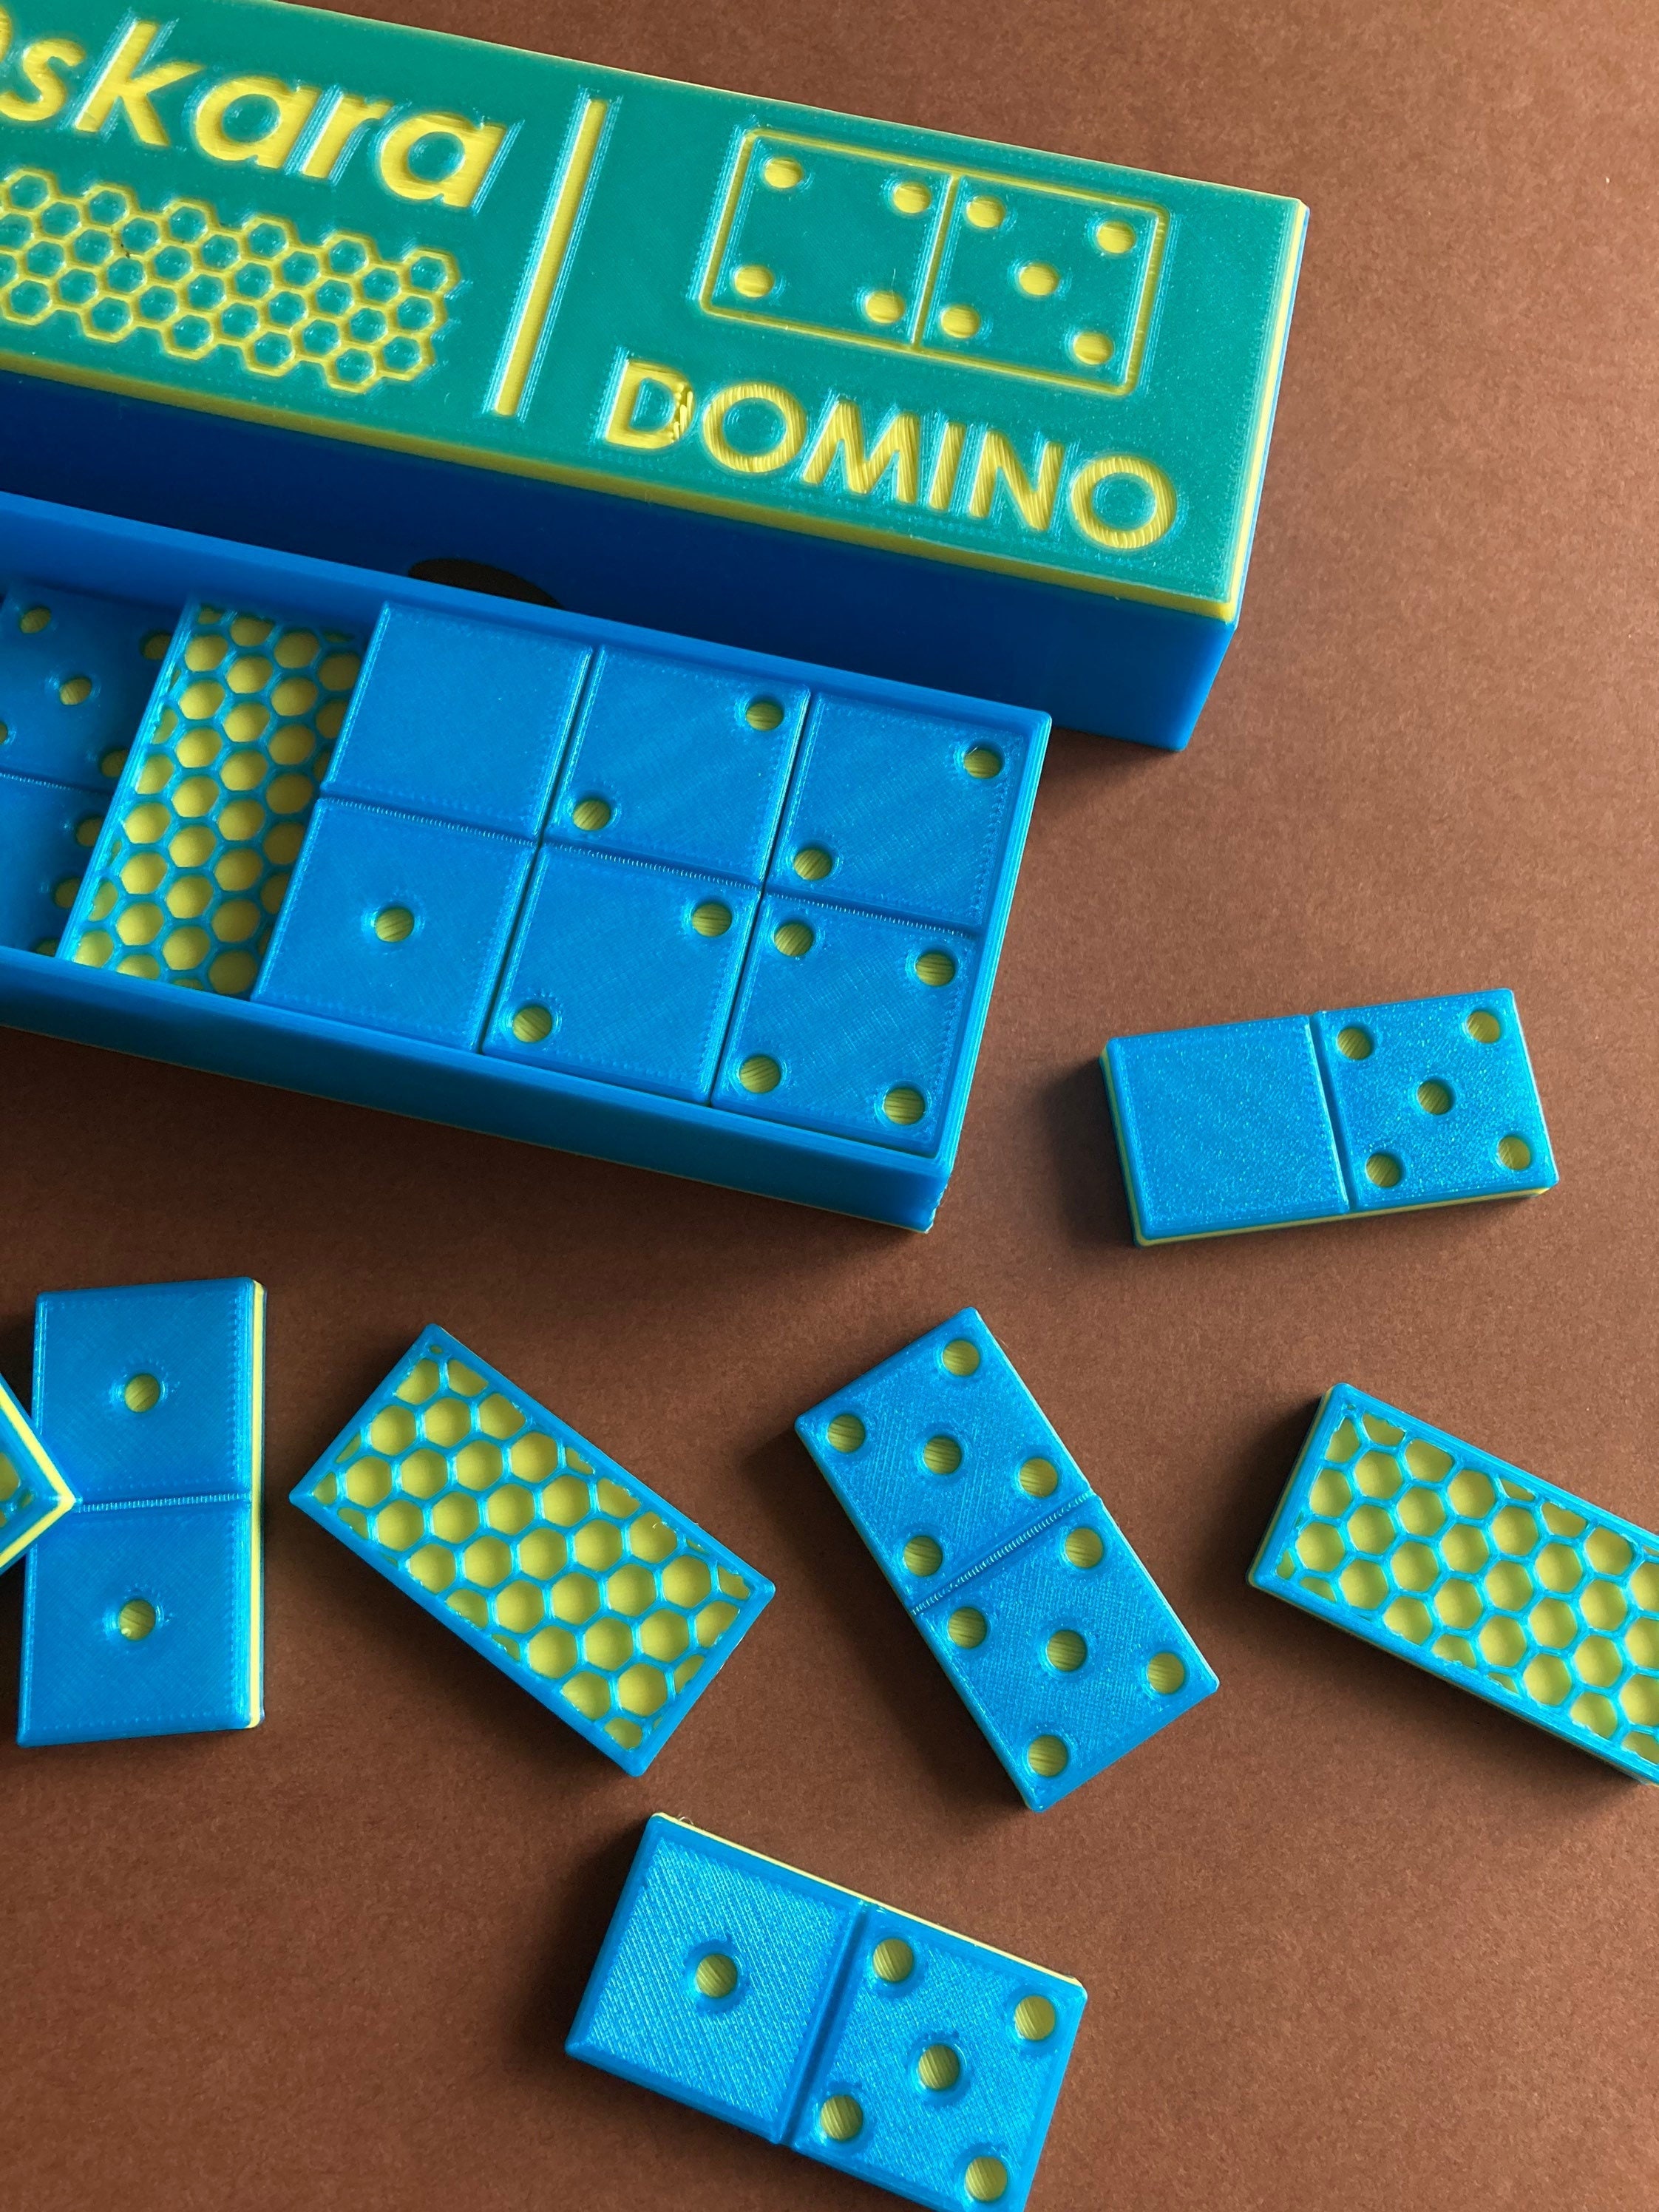 We Love The Game Of Domino's